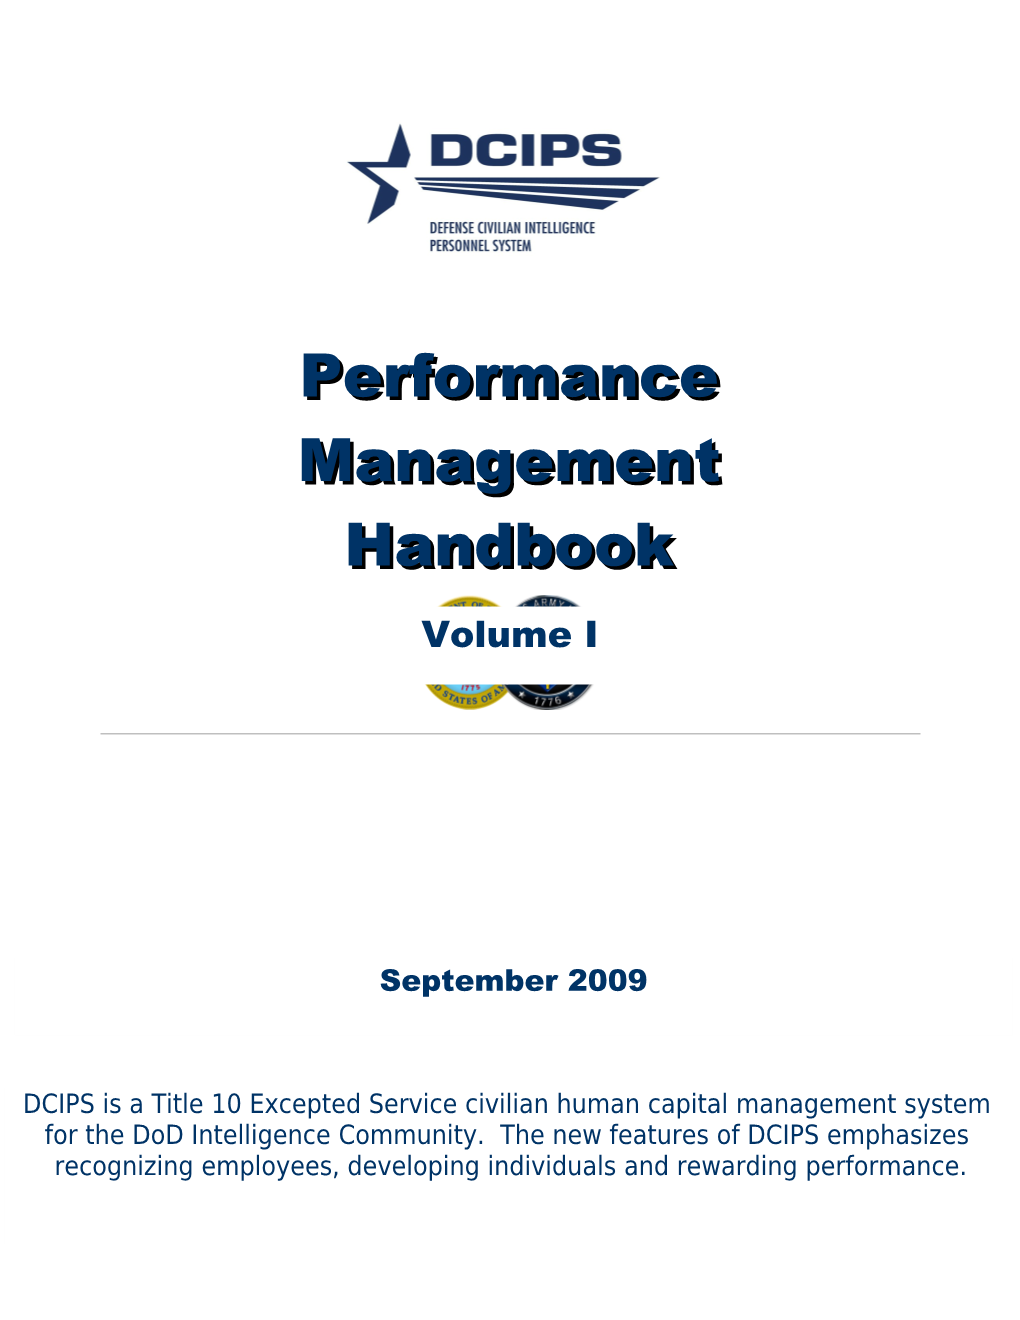 Performance Management: Overview